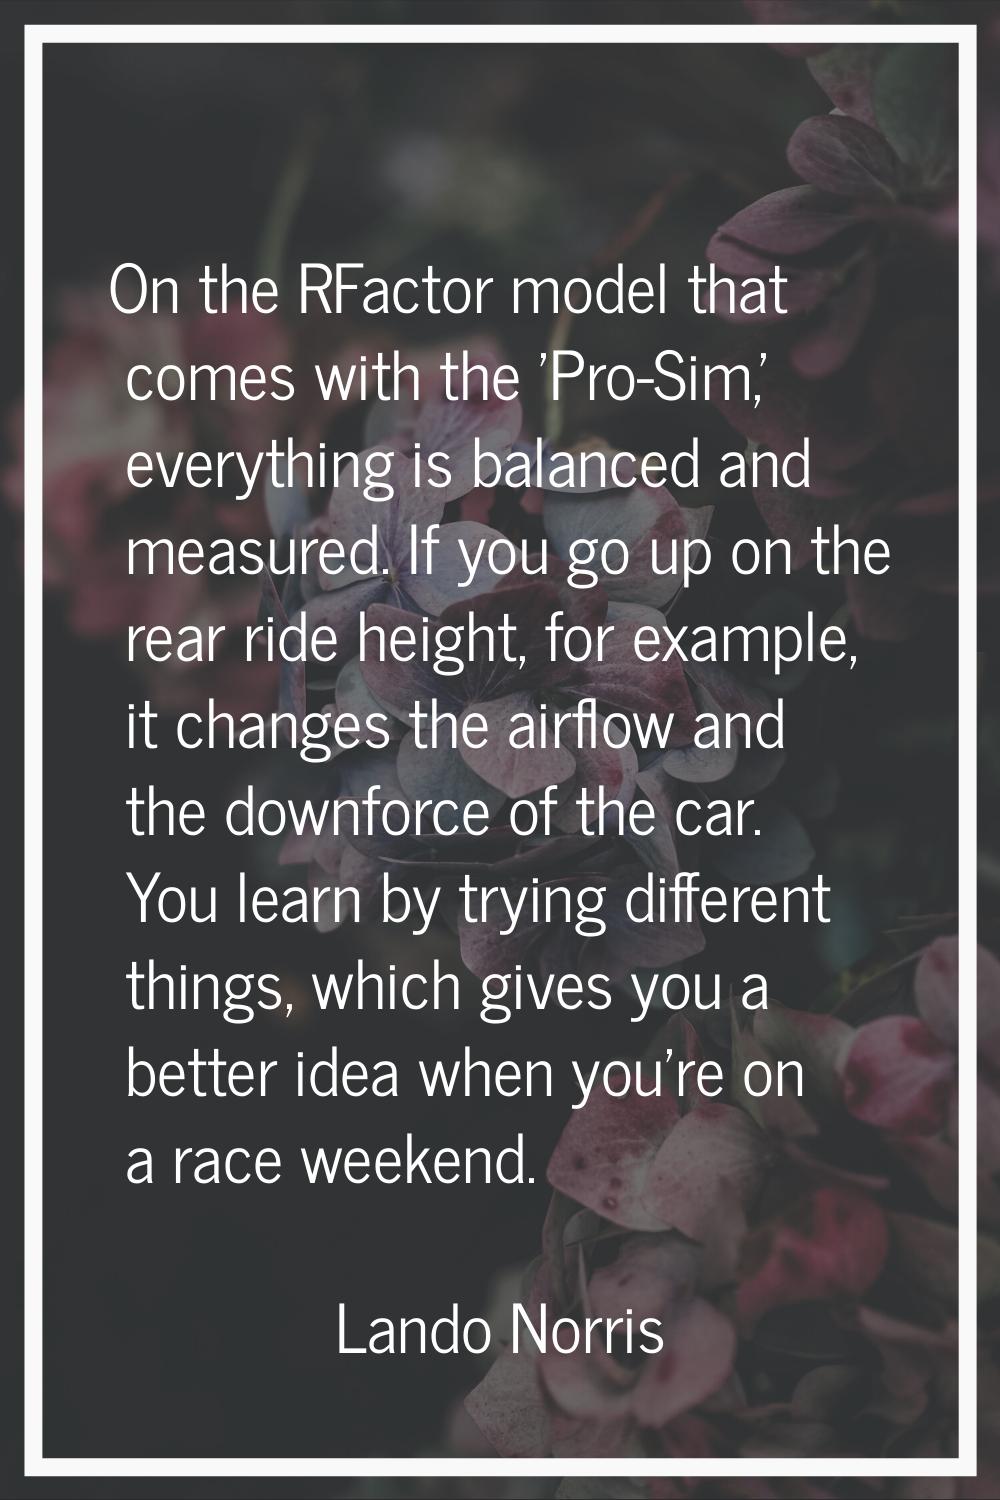 On the RFactor model that comes with the 'Pro-Sim,' everything is balanced and measured. If you go 